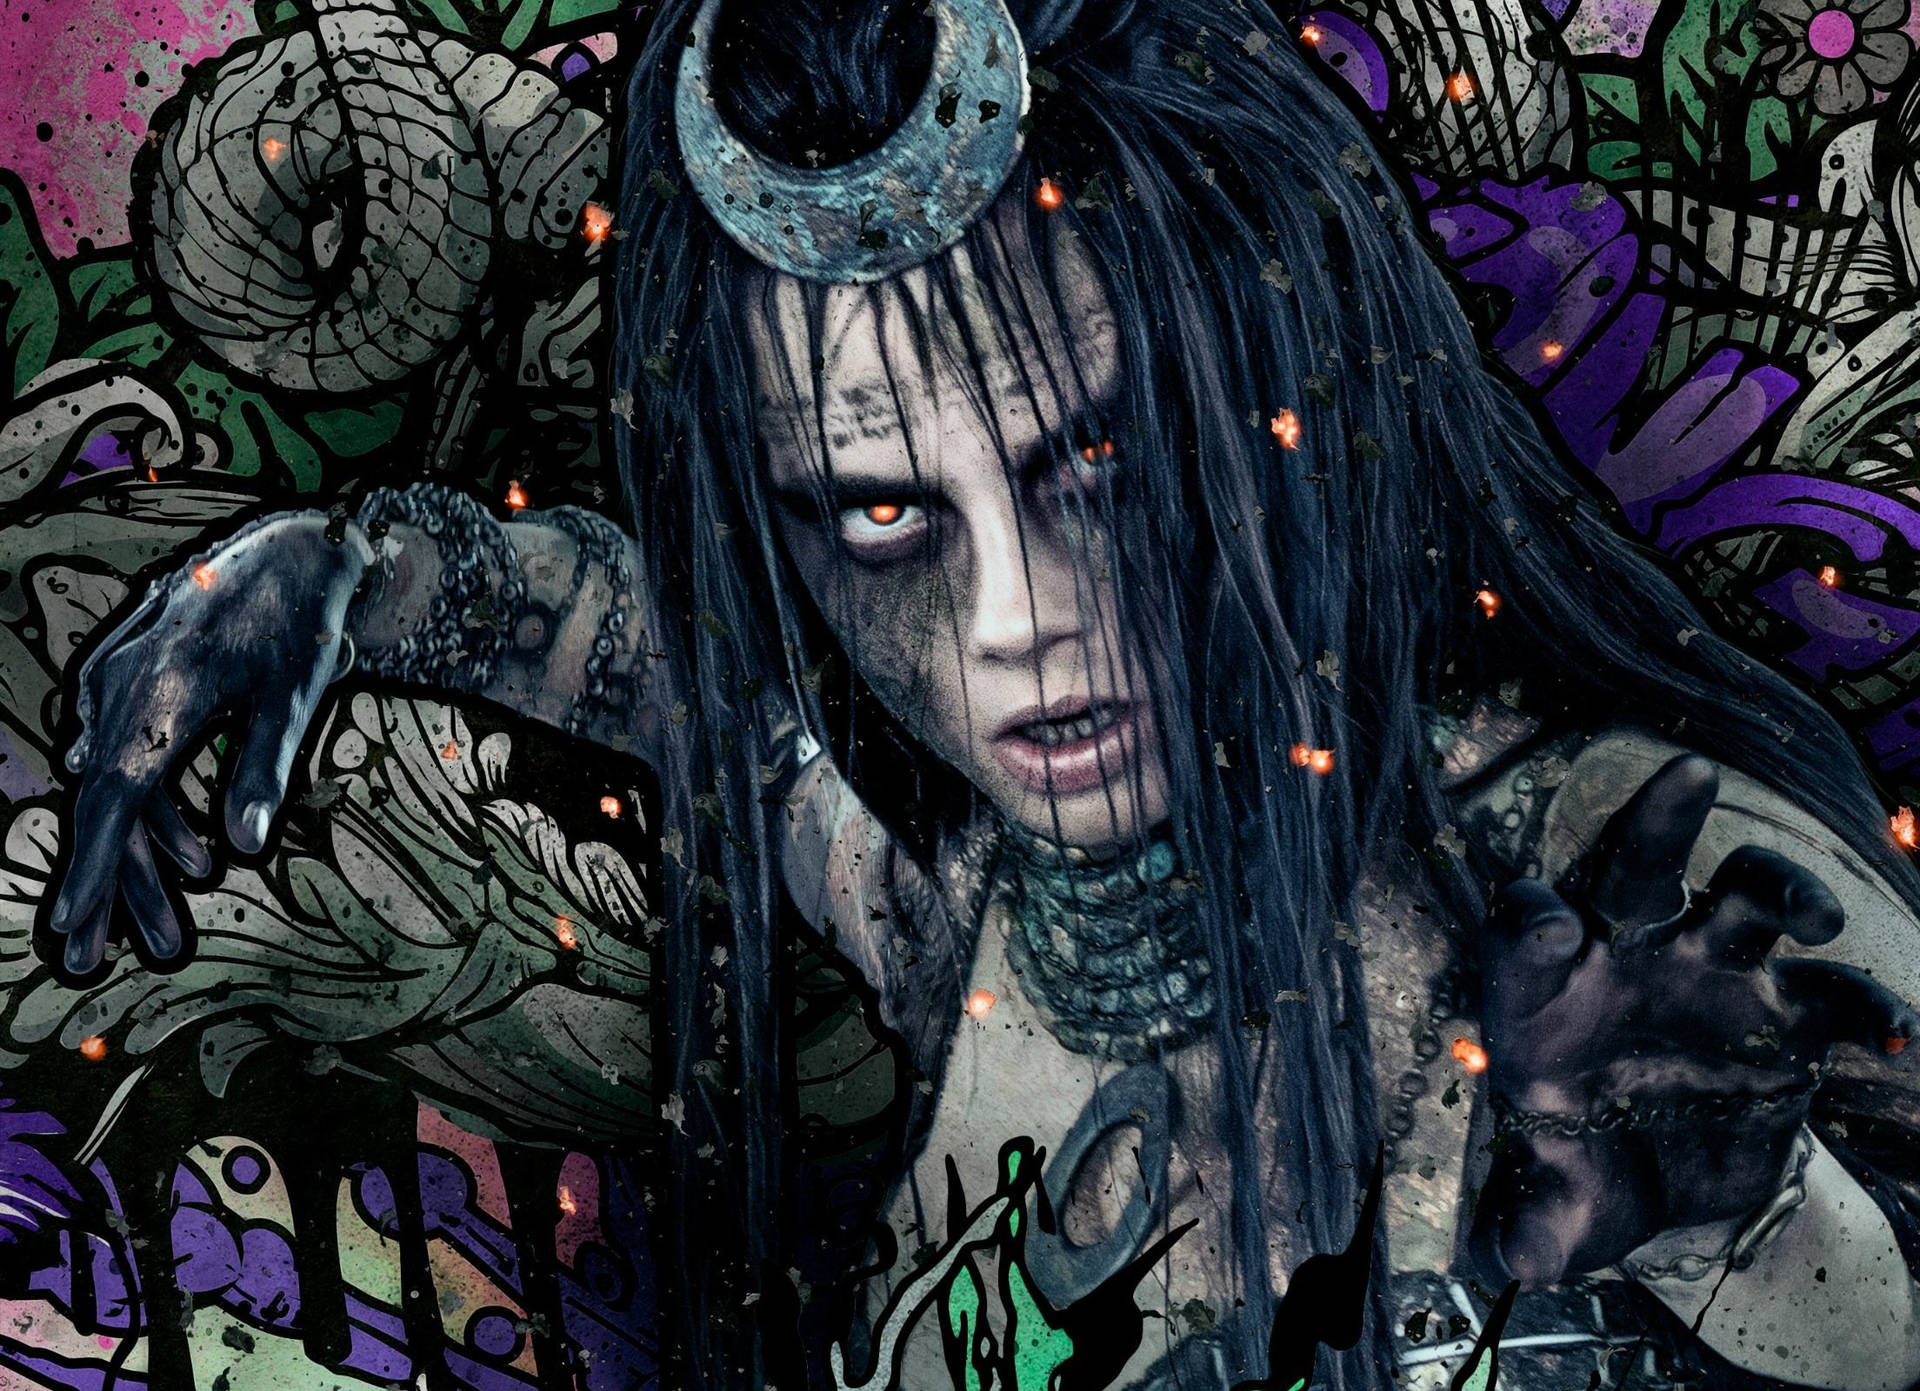 Enchantress From Suicide Squad; A Mischievous And Misunderstood Supervillain Background